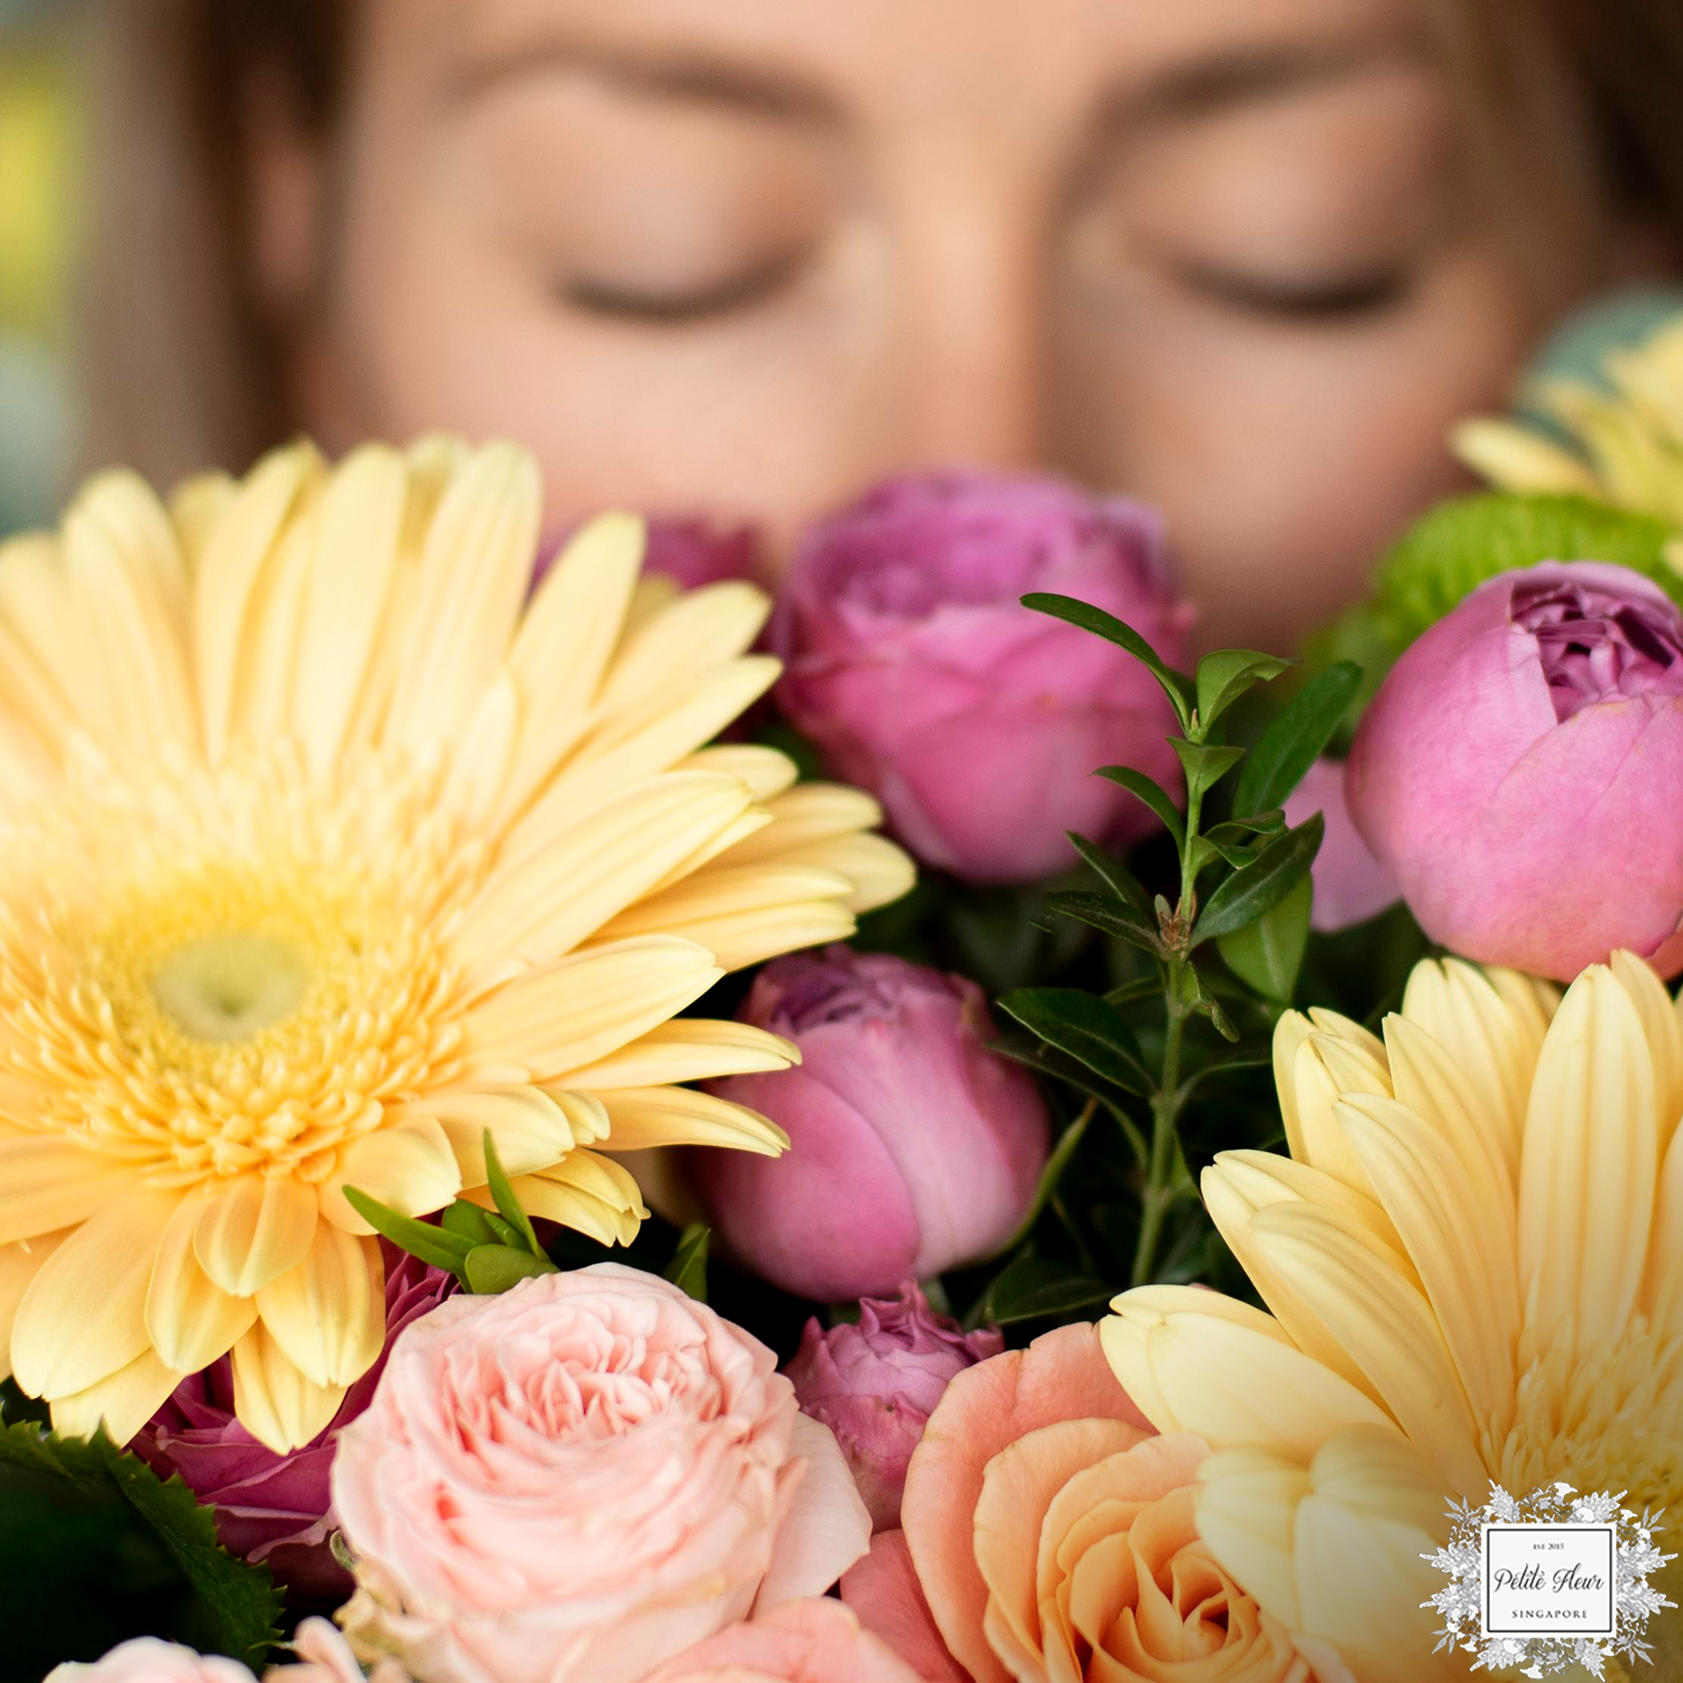 Best Hypoallergenic Flowers For Your Loved Ones With Allergies